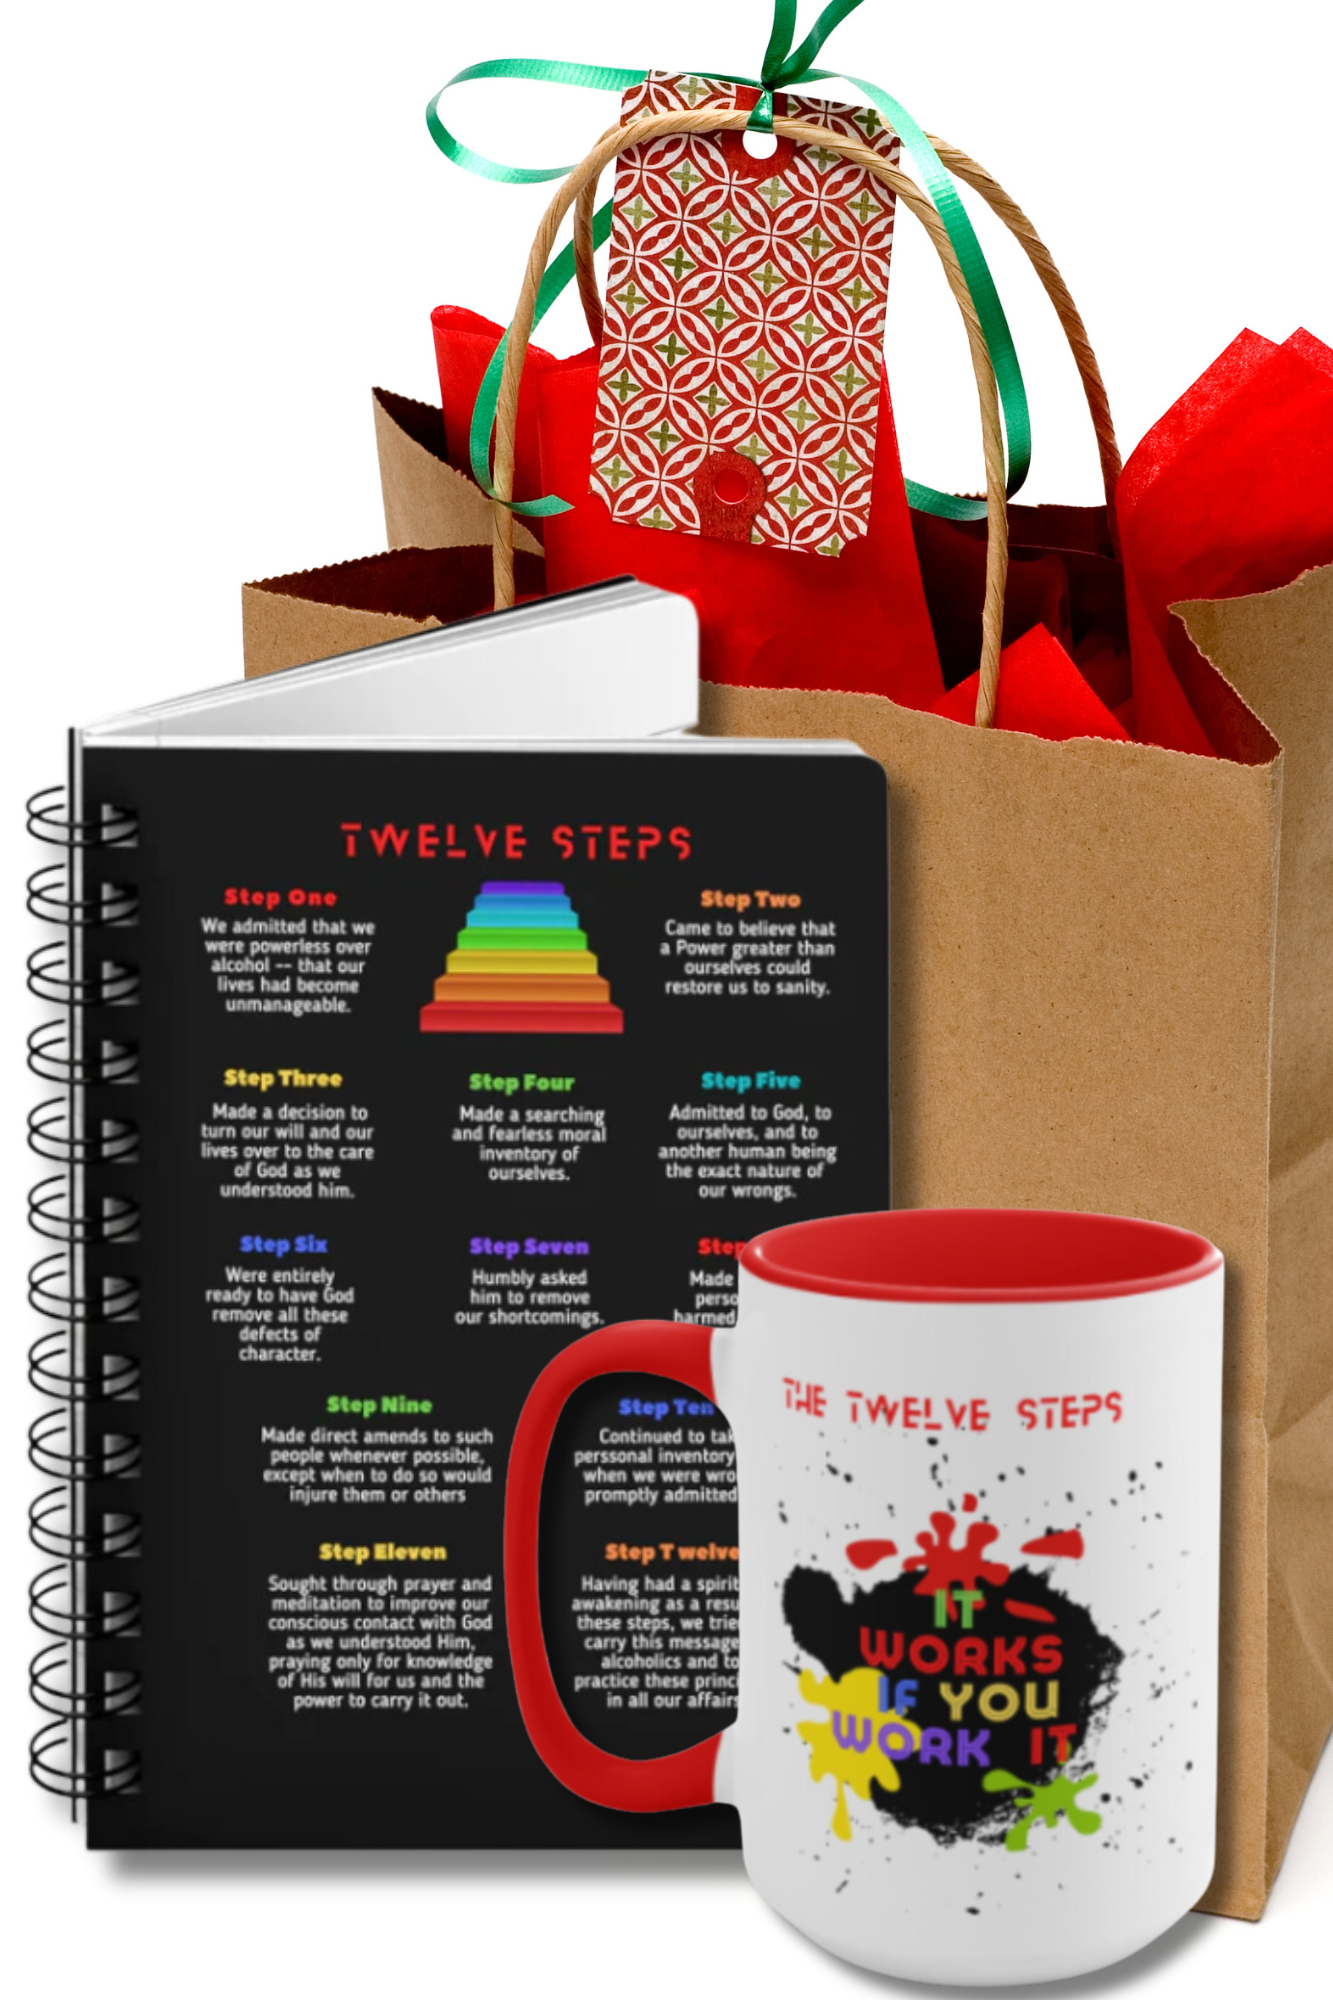 RECOVERY TOOLKIT "It Works If You Work It" 15 oz. Mug w/ Recovery Journal (2 gifts in 1) FREE SHIPPING